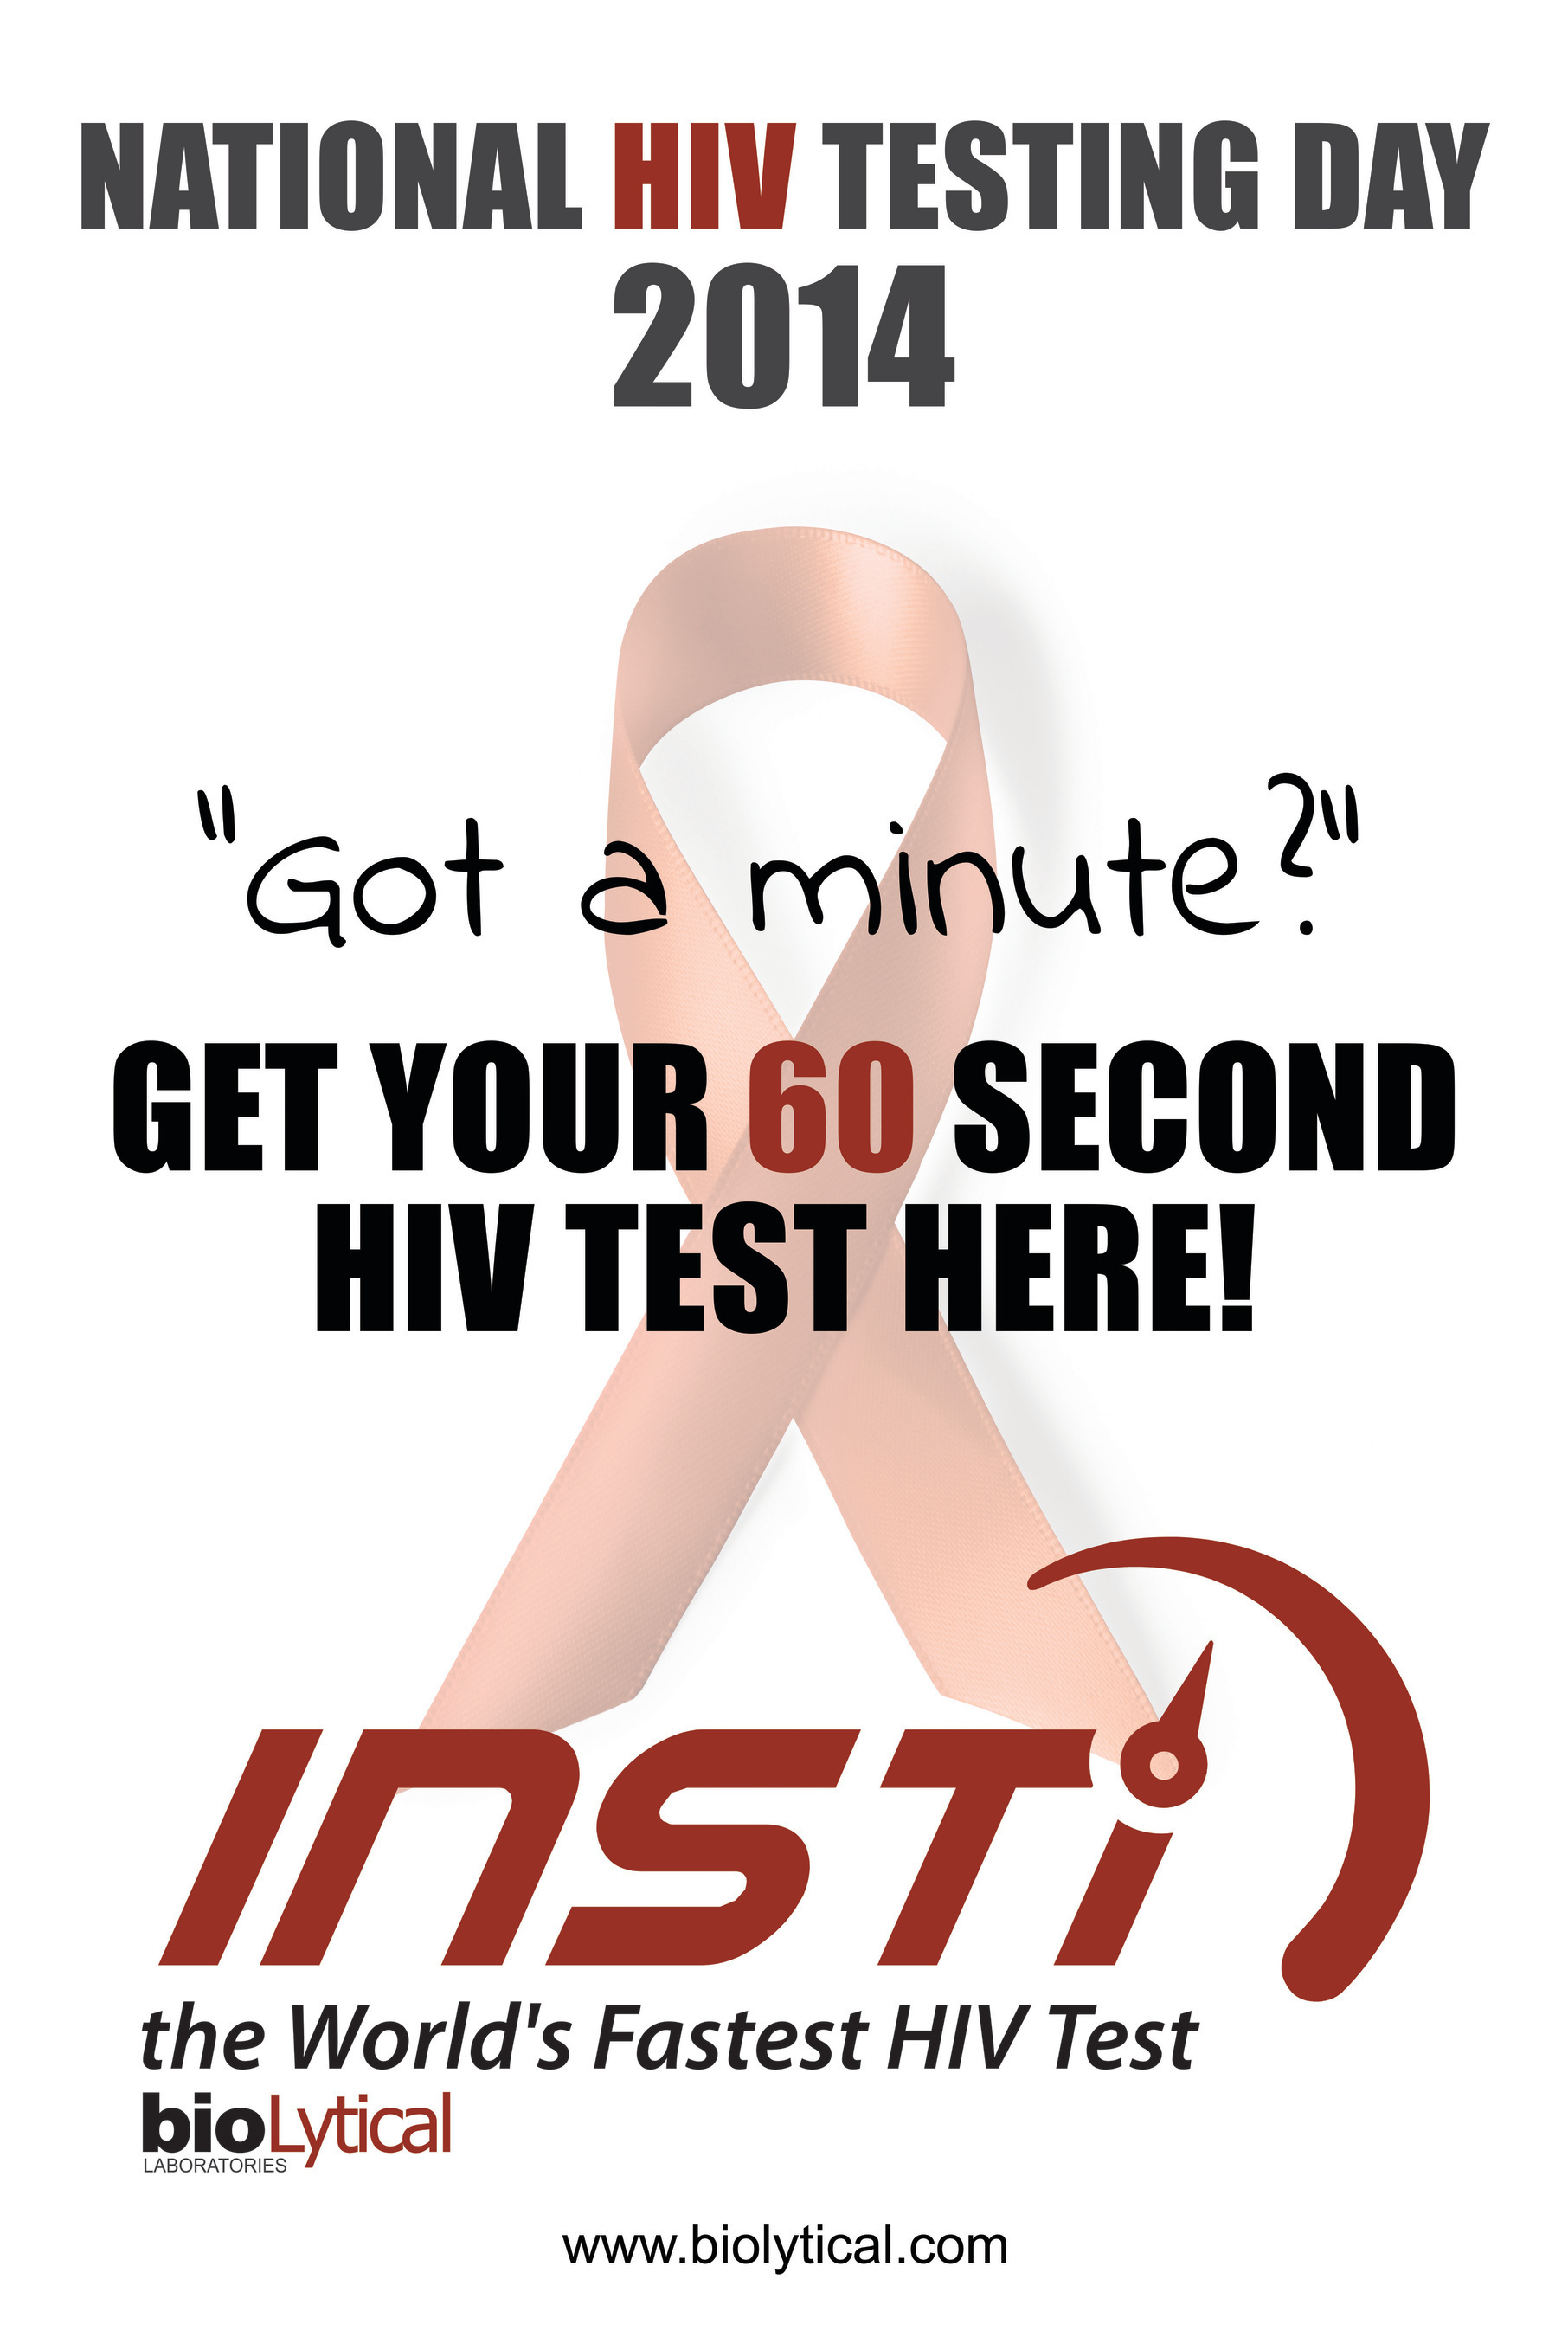 Free 1 Minute INSTI HIV tests are available at select Walgreens locations nationwide this Friday (PRNewsFoto/bioLytical Laboratories)